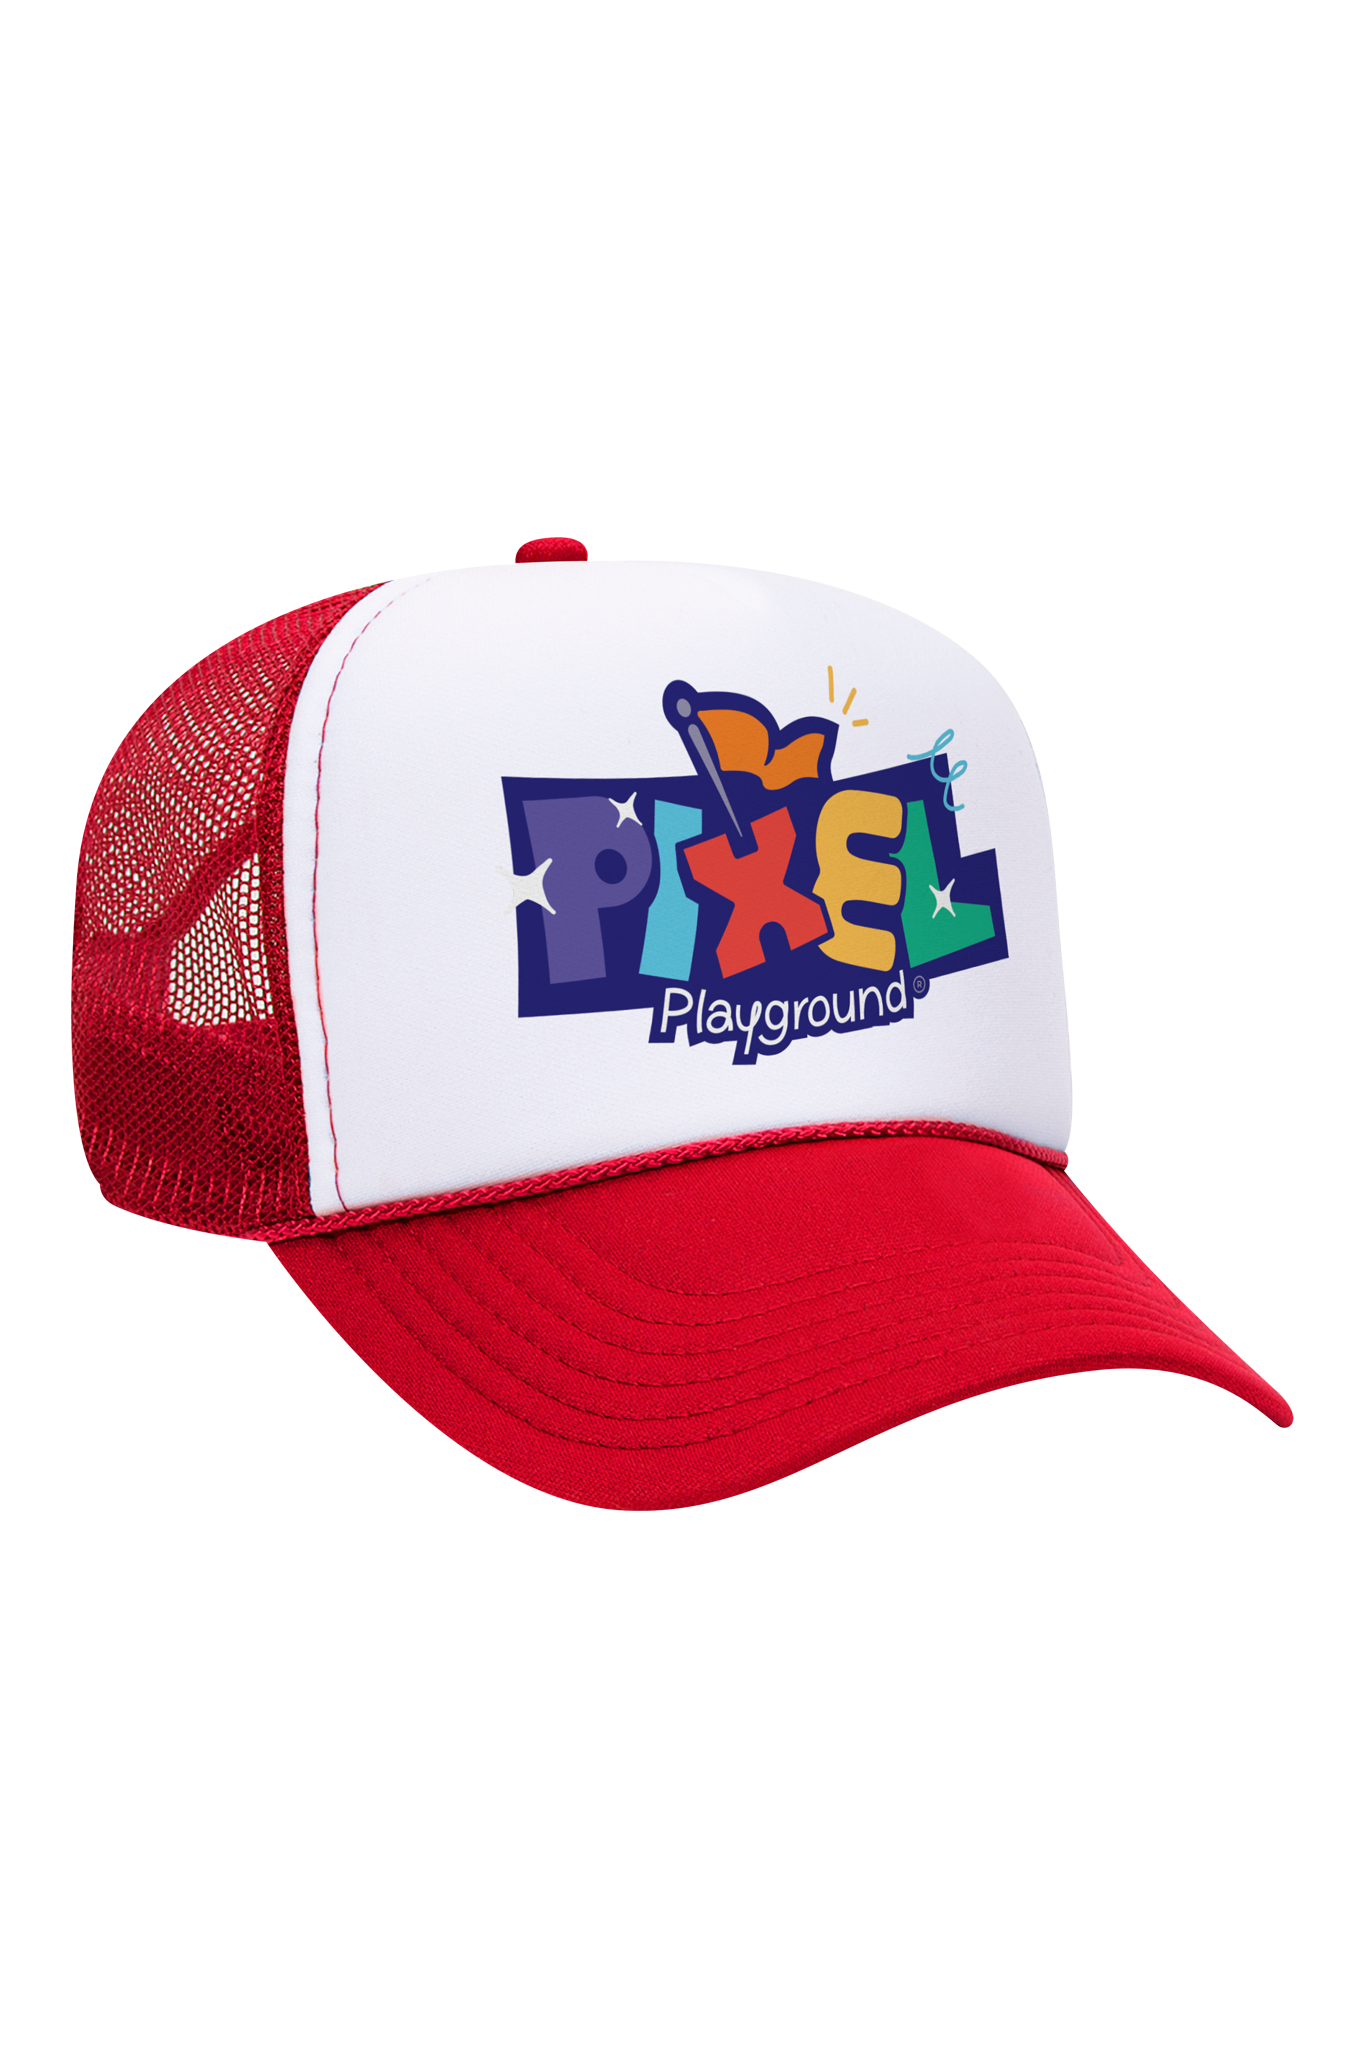 Red and white cap featuring the Pixel Playground logo.